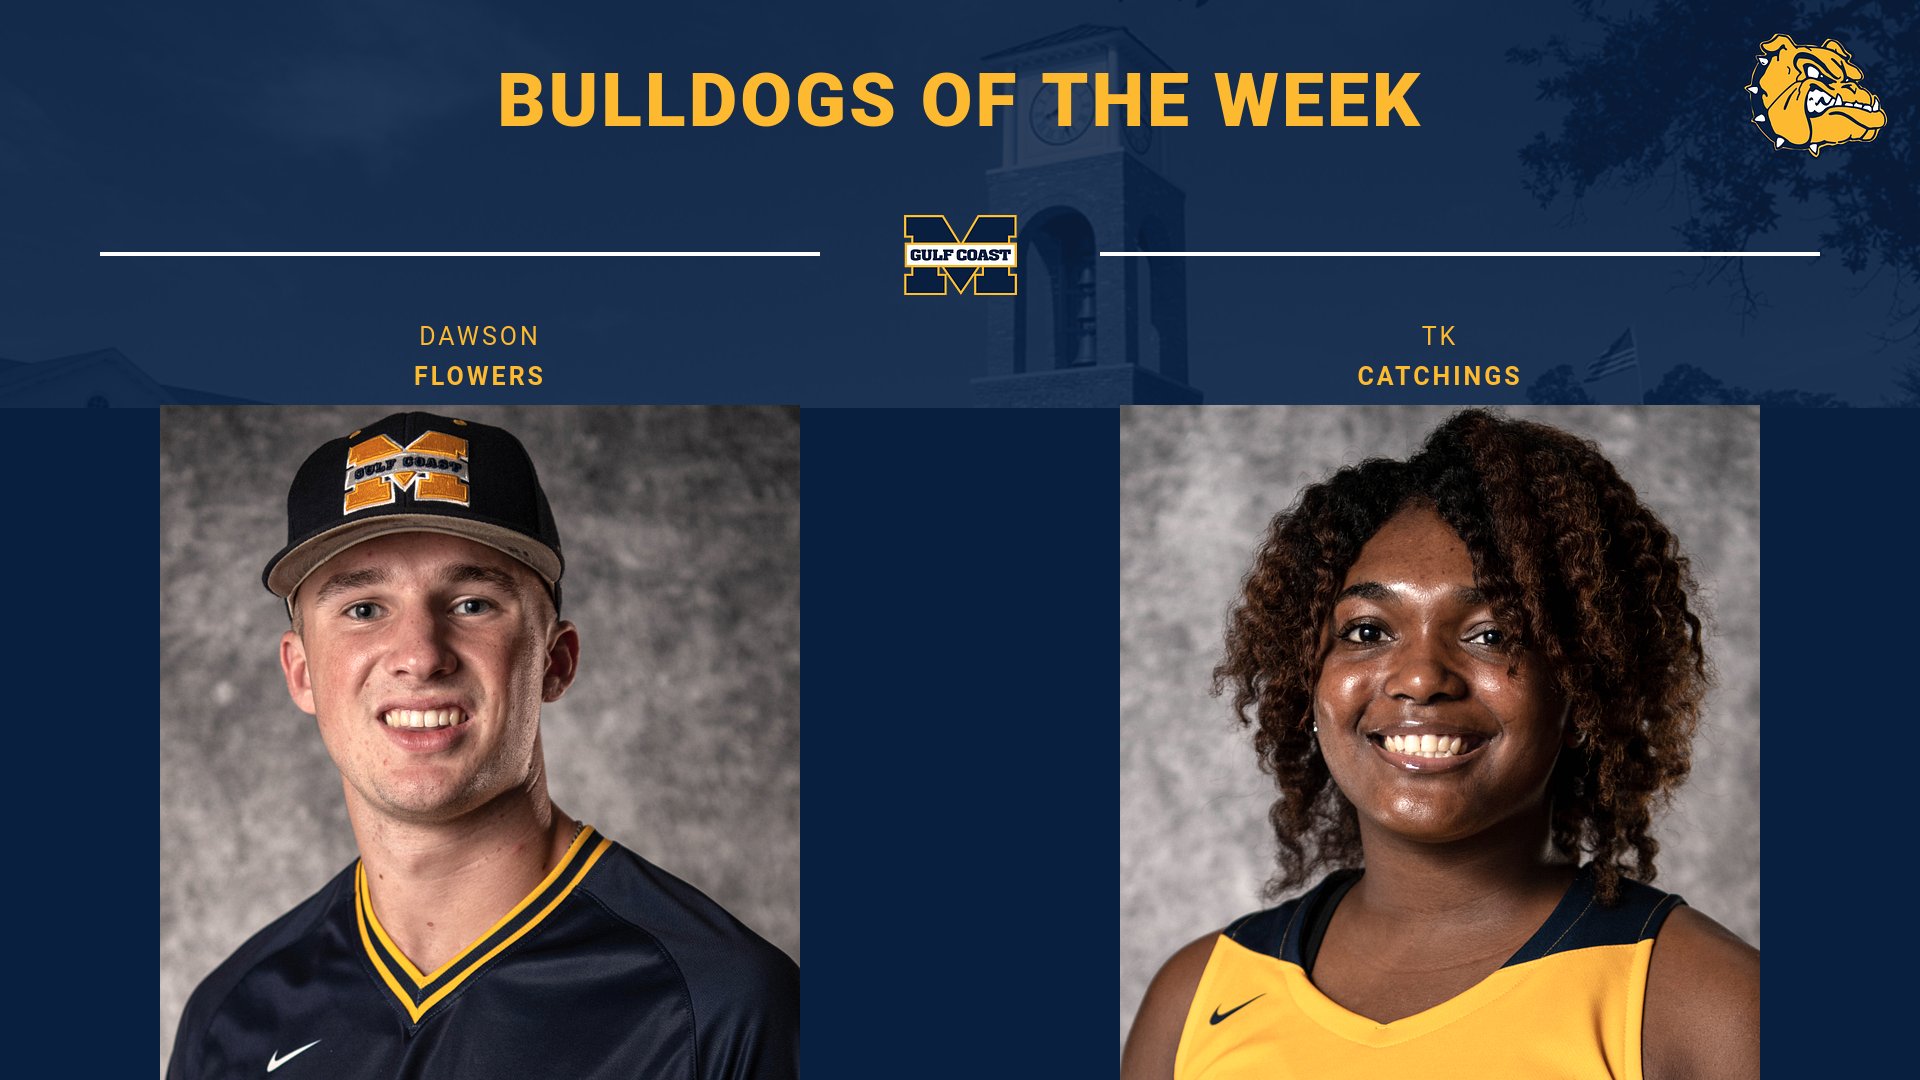 Flowers, Catching named Bulldogs of the Week